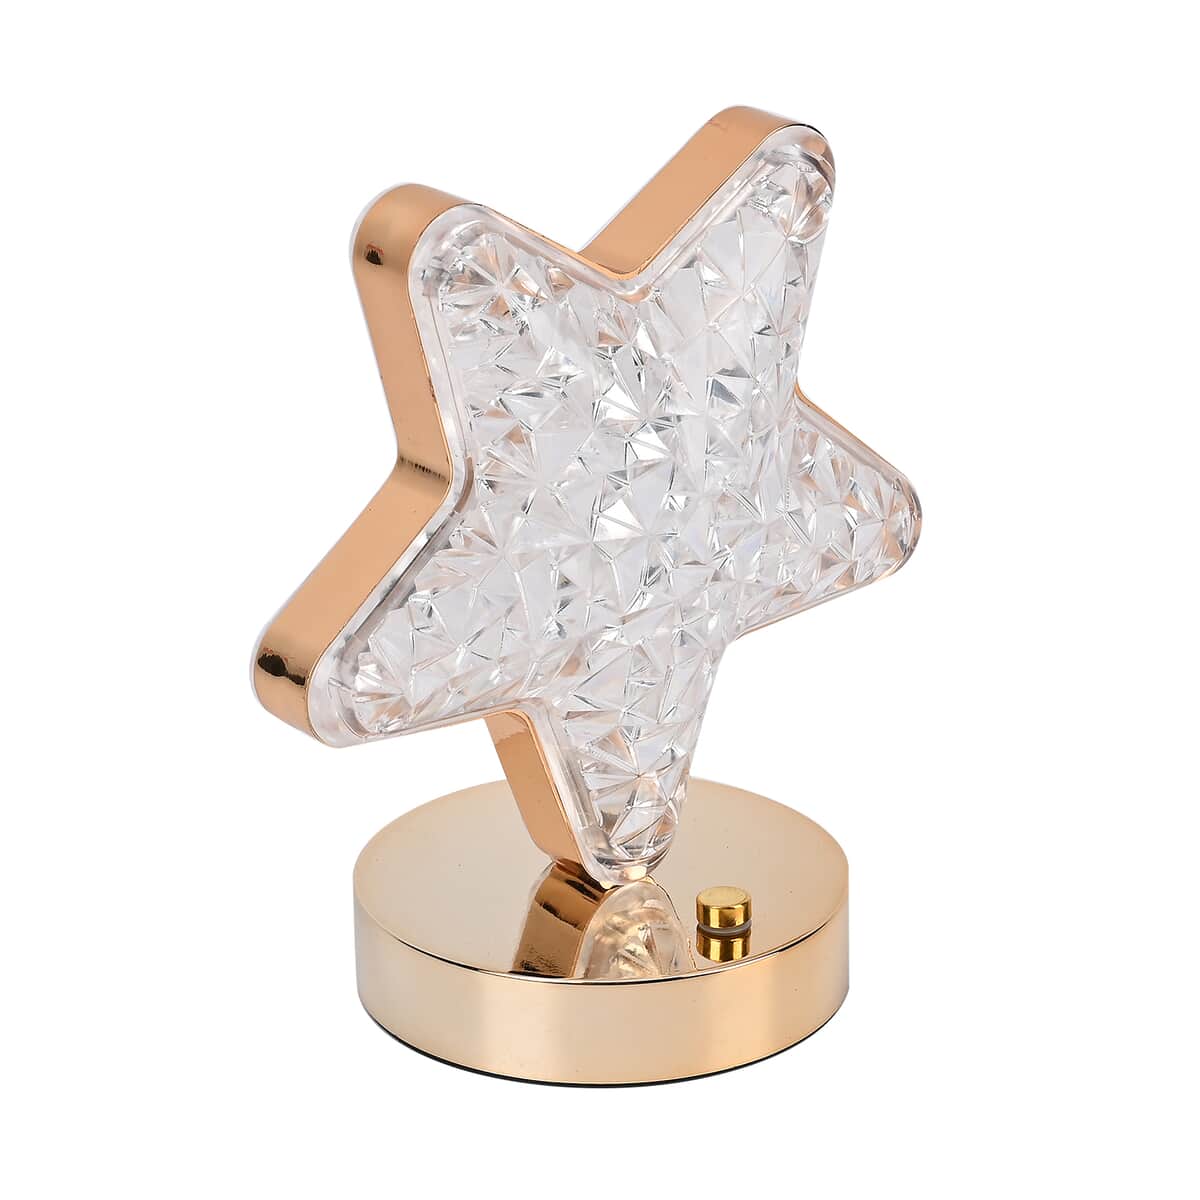 Touch Controlled Star-shaped Crystal Table Lamp (5.9"x6.9") image number 3